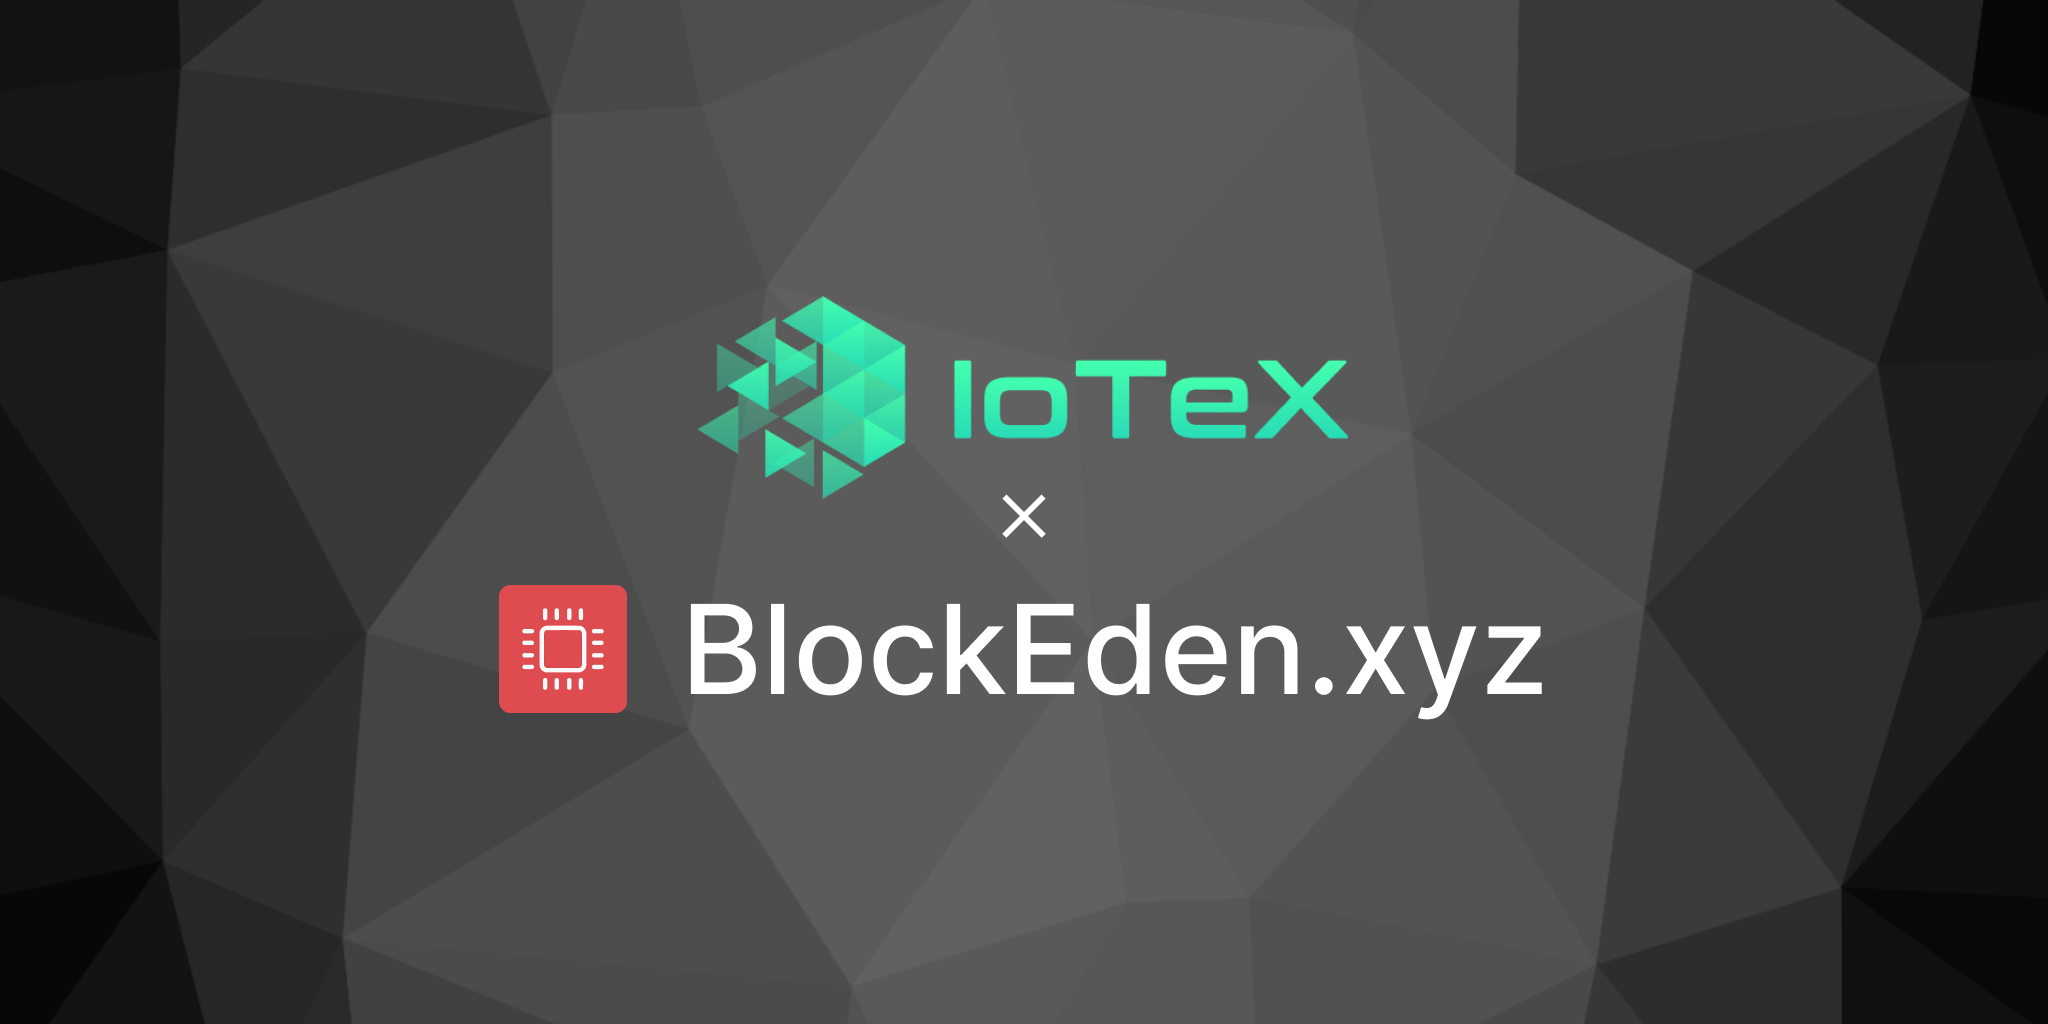 BlockEden.xyz teams up with IoTeX to simplify decentralized IoT Application